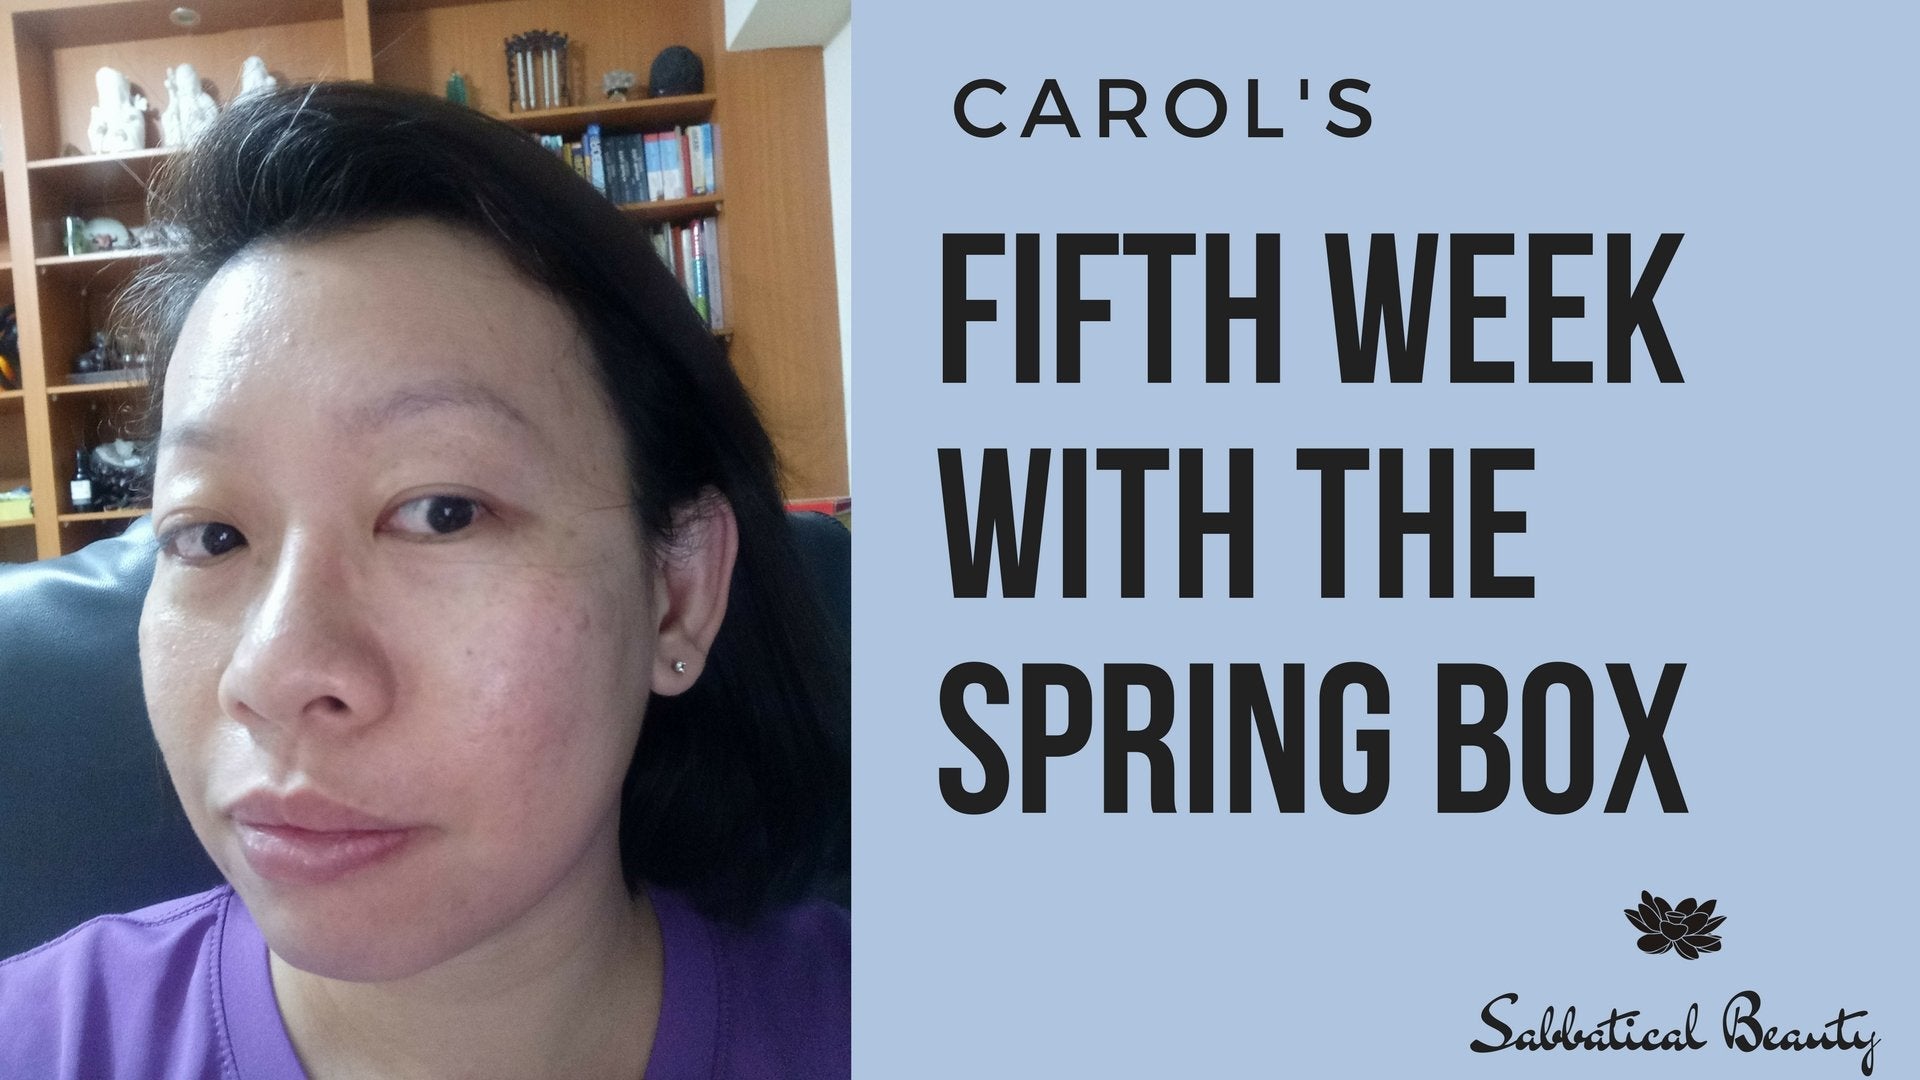 Carol's Fifth Week With the Spring Box - Sabbatical Beauty